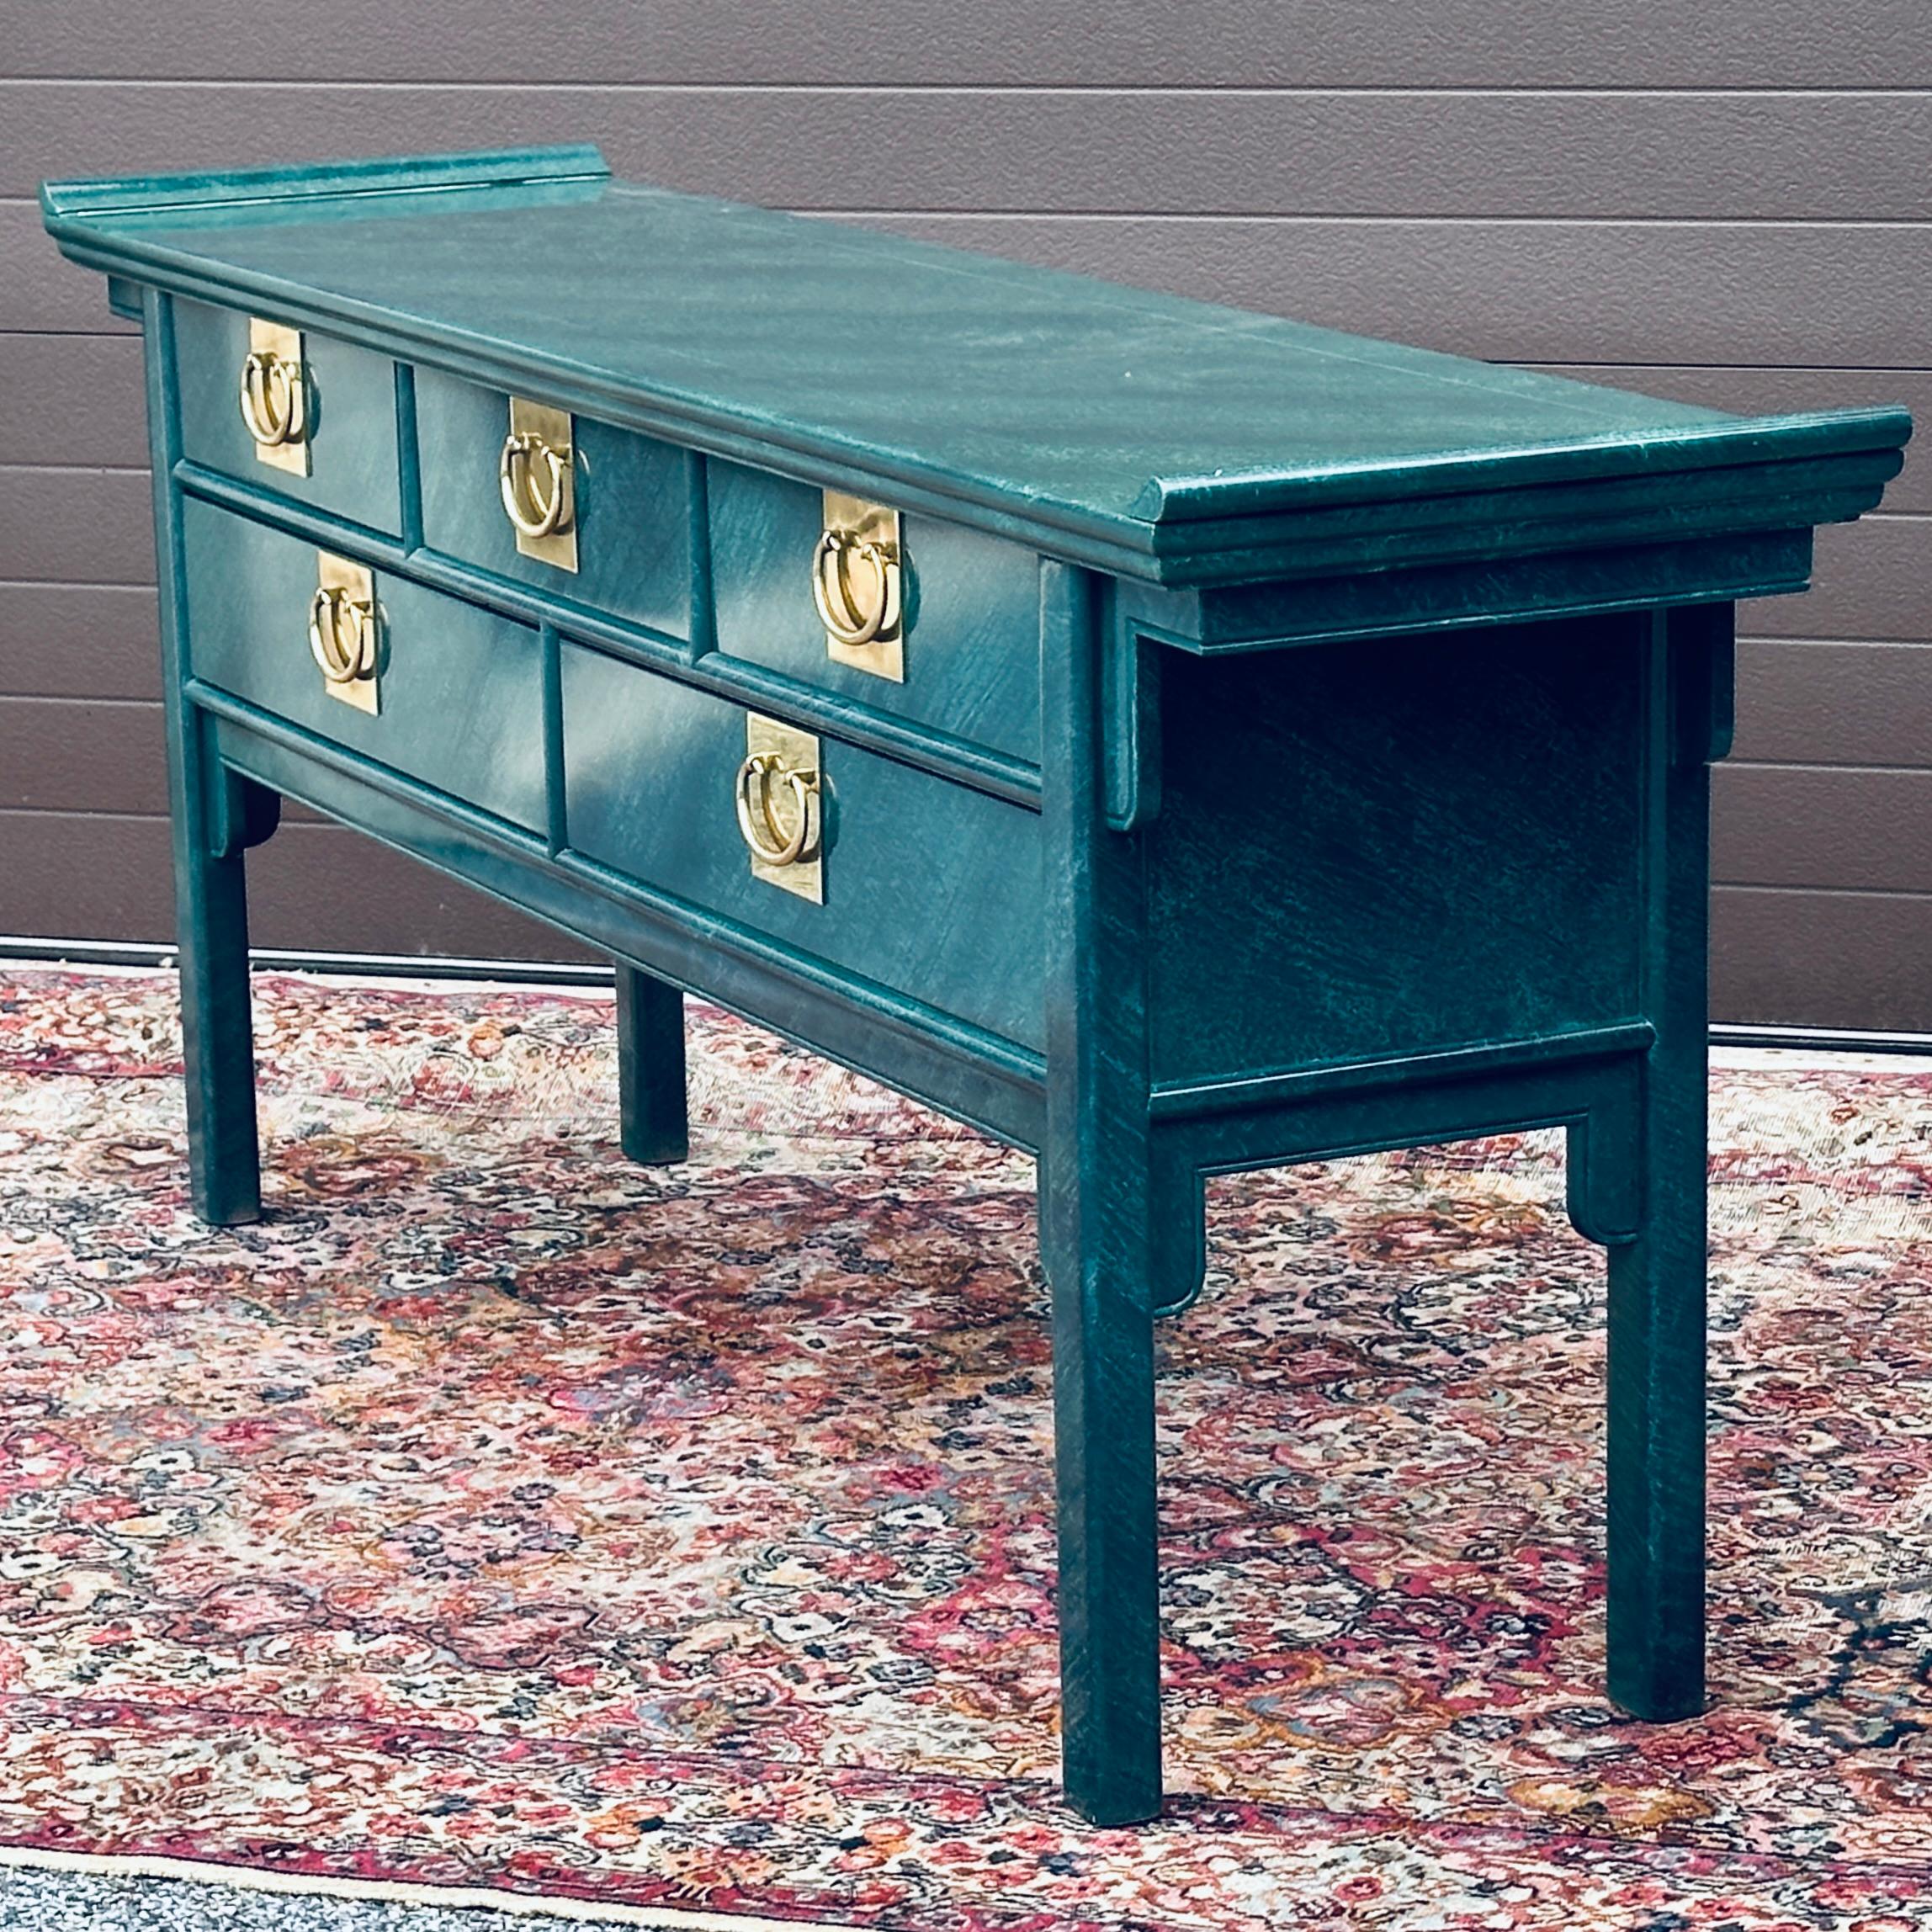 Pagoda shaped chinoiserie style console table and mirror set with the original faux malachite finish. Features five drawers with big brass hardware and generous storage capacity. Faux finish on all sides including back. Attributed to Century